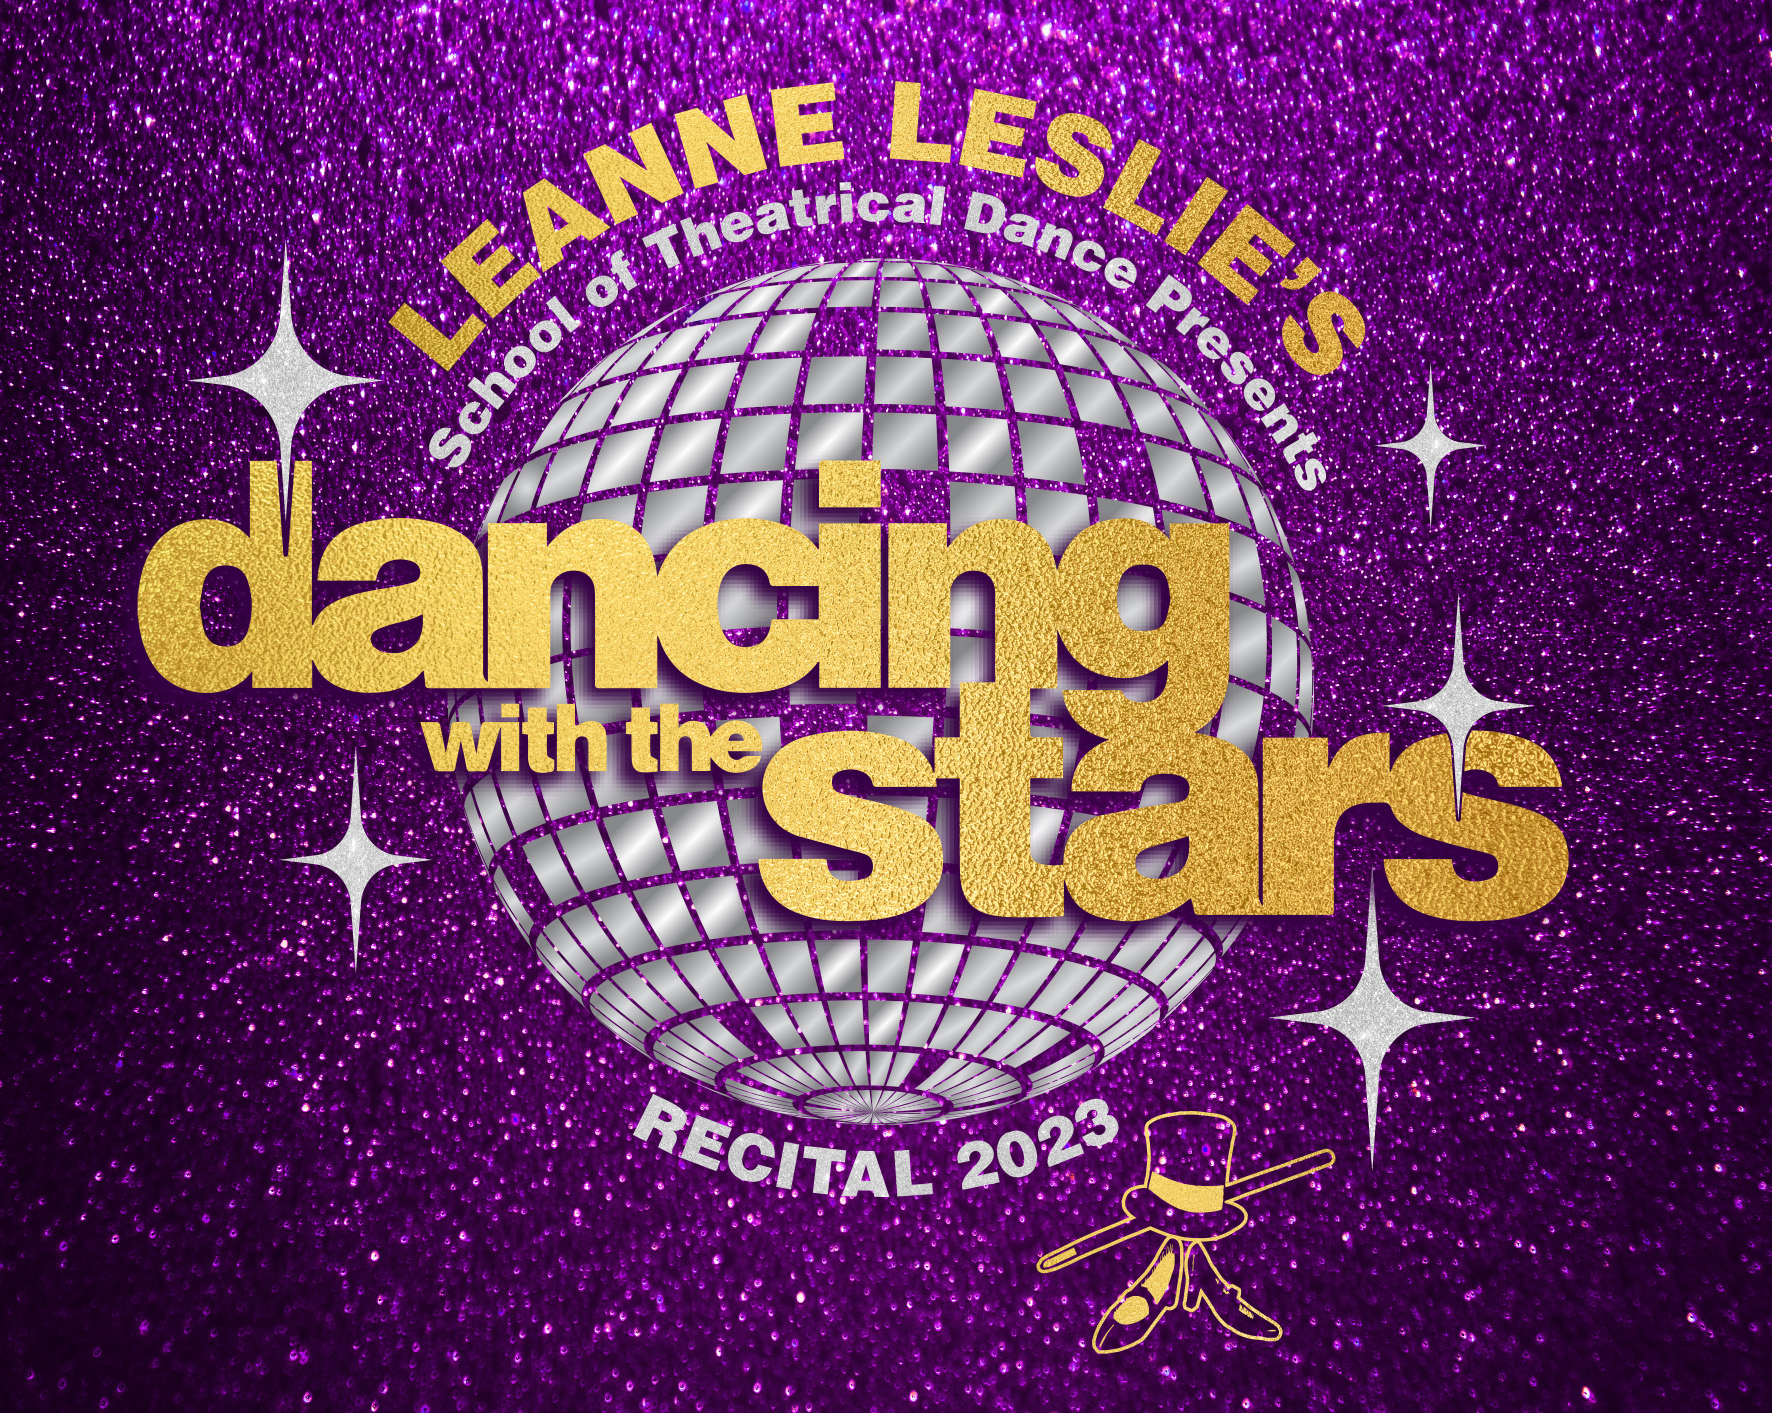 the logo for dancing with the stars.